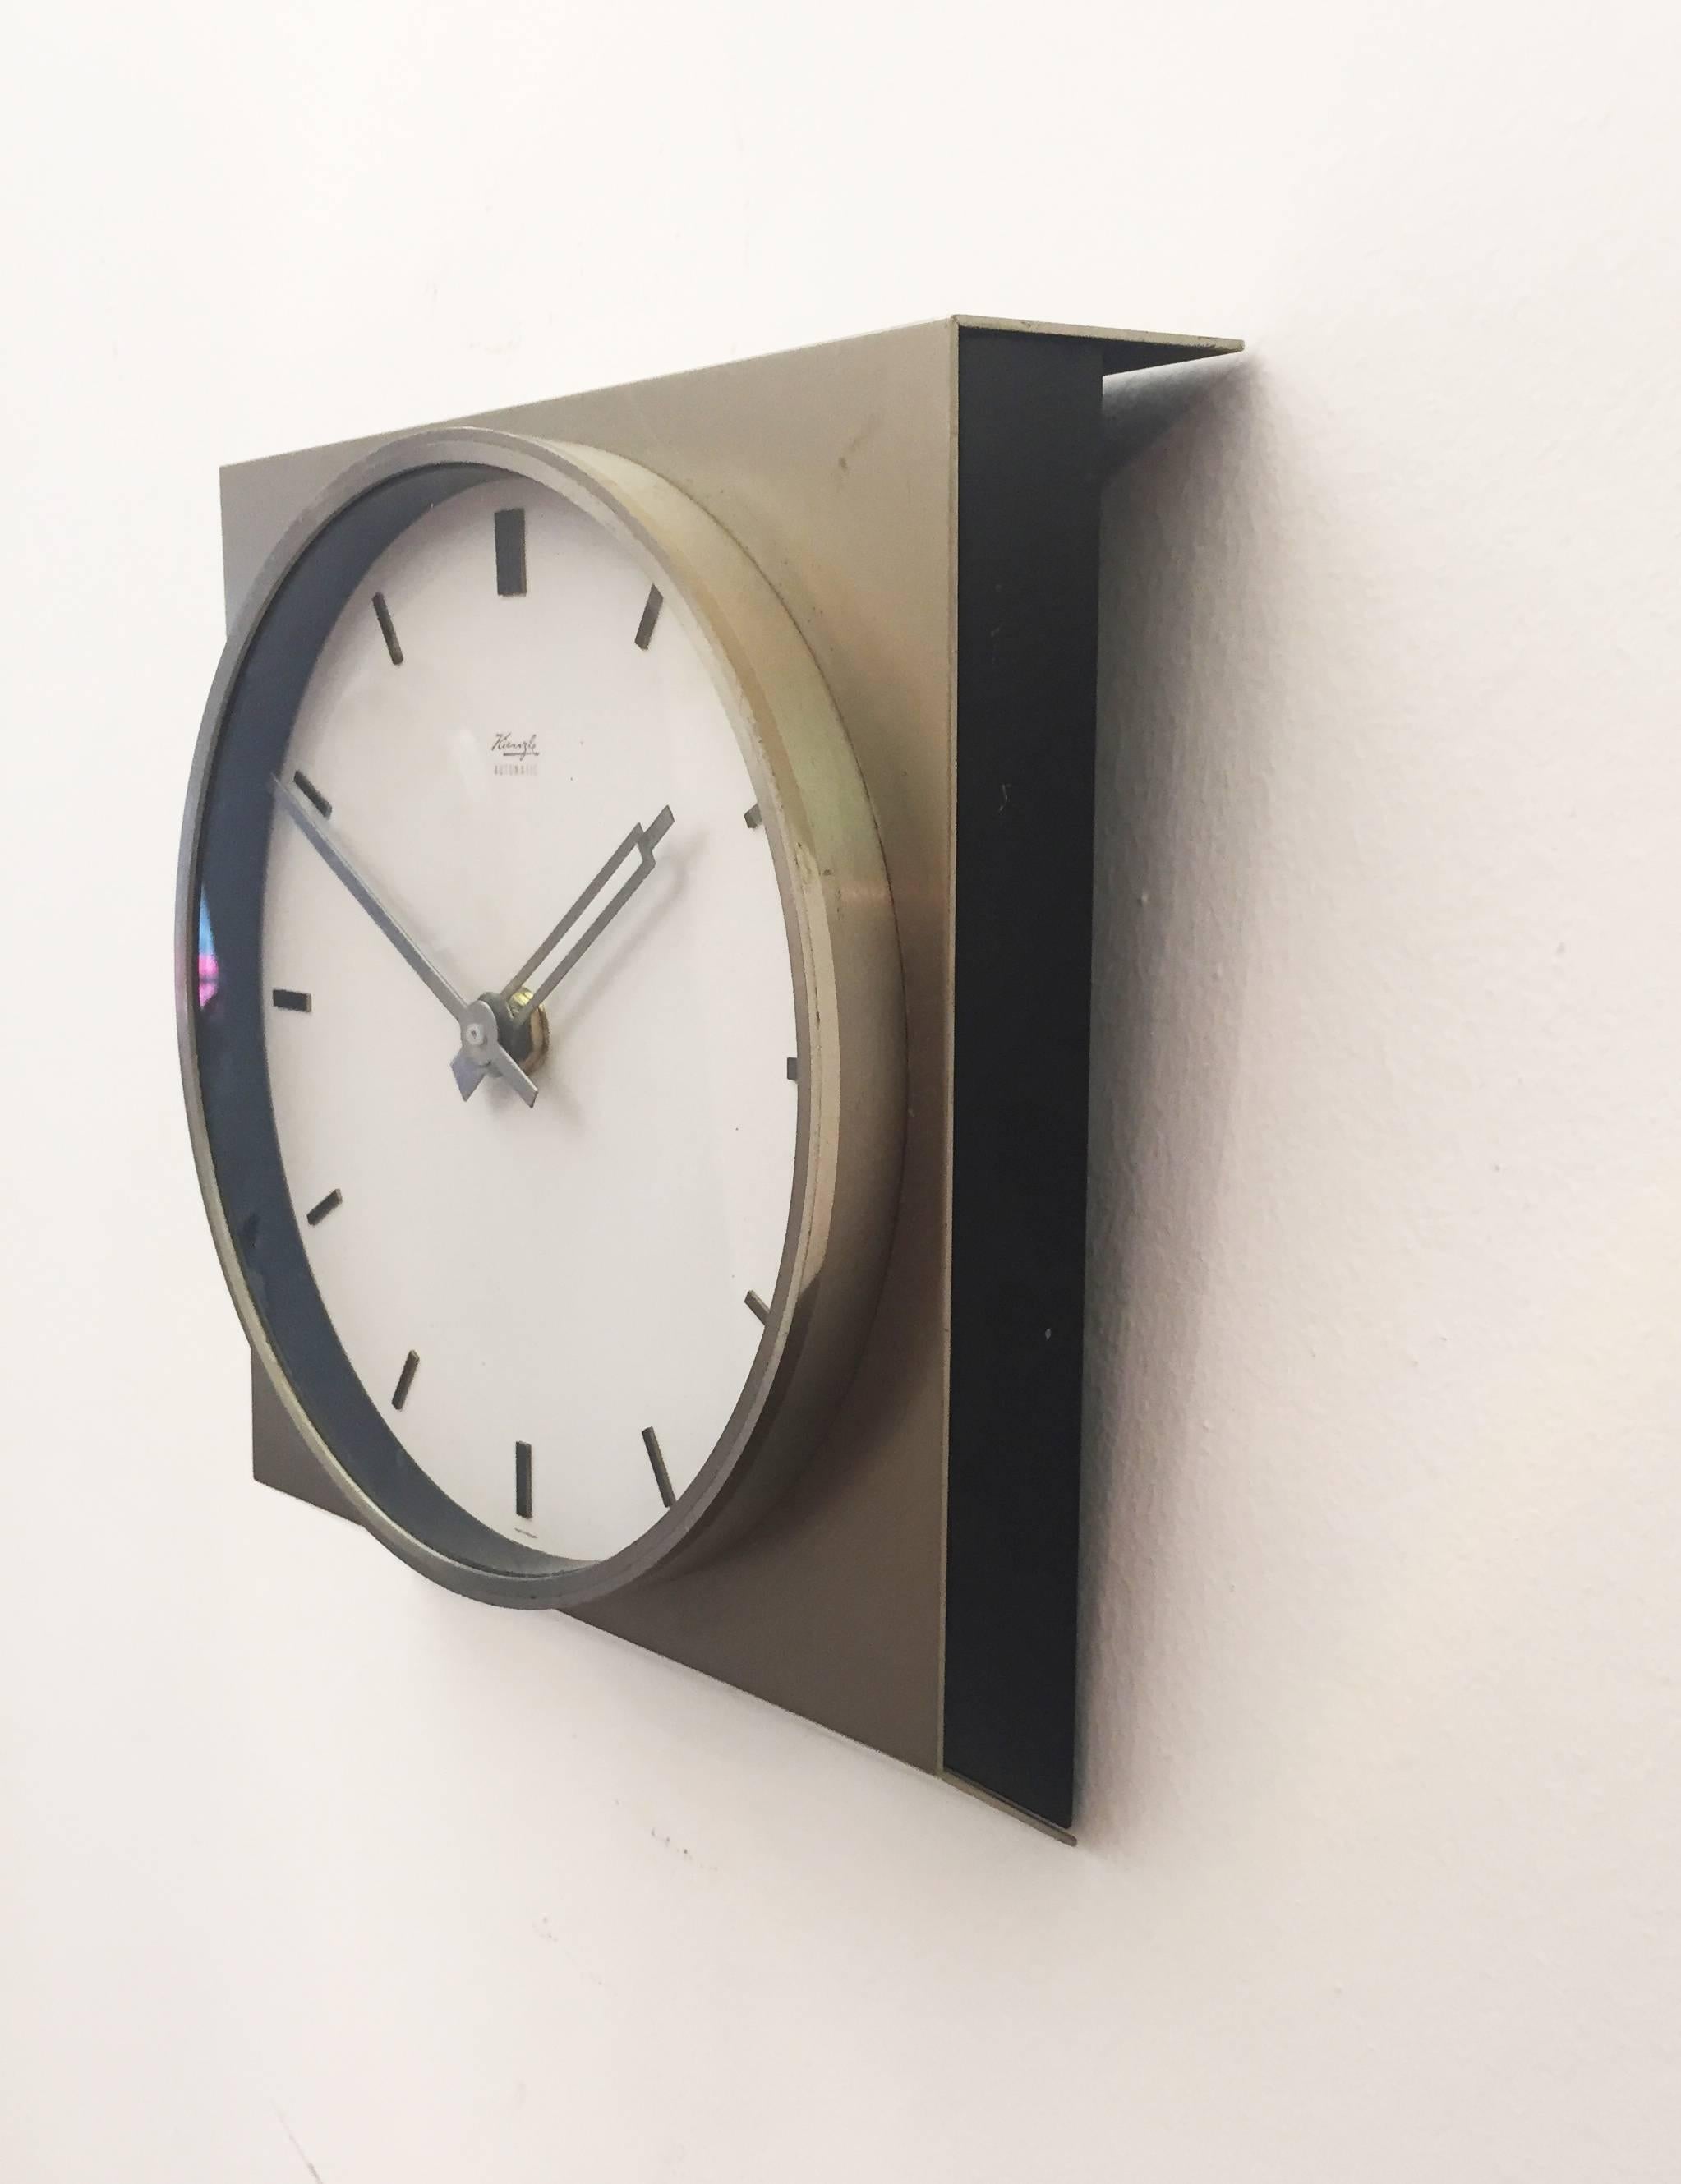 Steel construction with white painted clock face from the early 1960s.
Fitted with AAA-battery movement.
